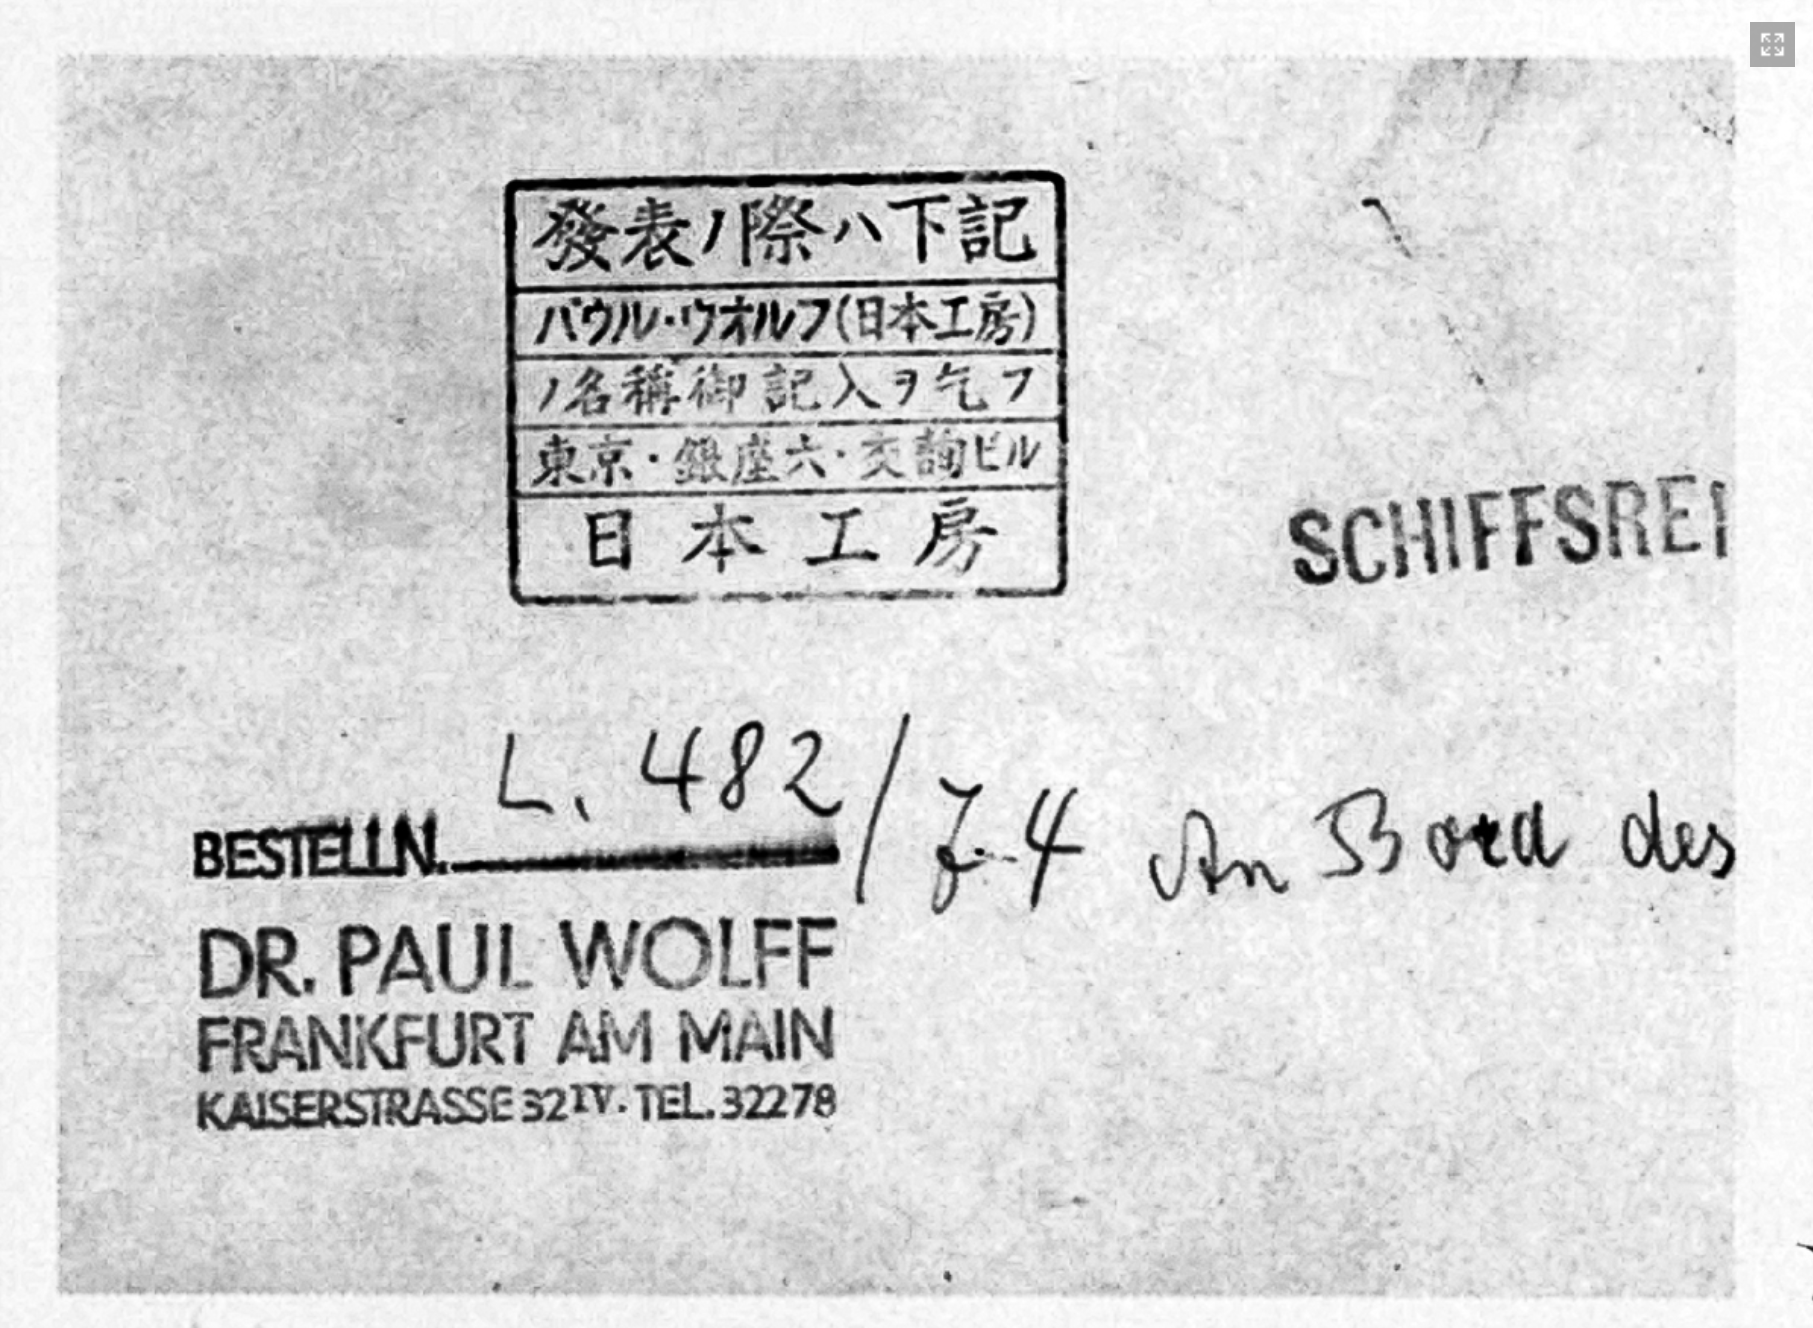 The backside of one of Dr. Wolff ’s photos from the Asahi show, with both Dr. Wolff ’s and Nihon Kōbō’s stamps